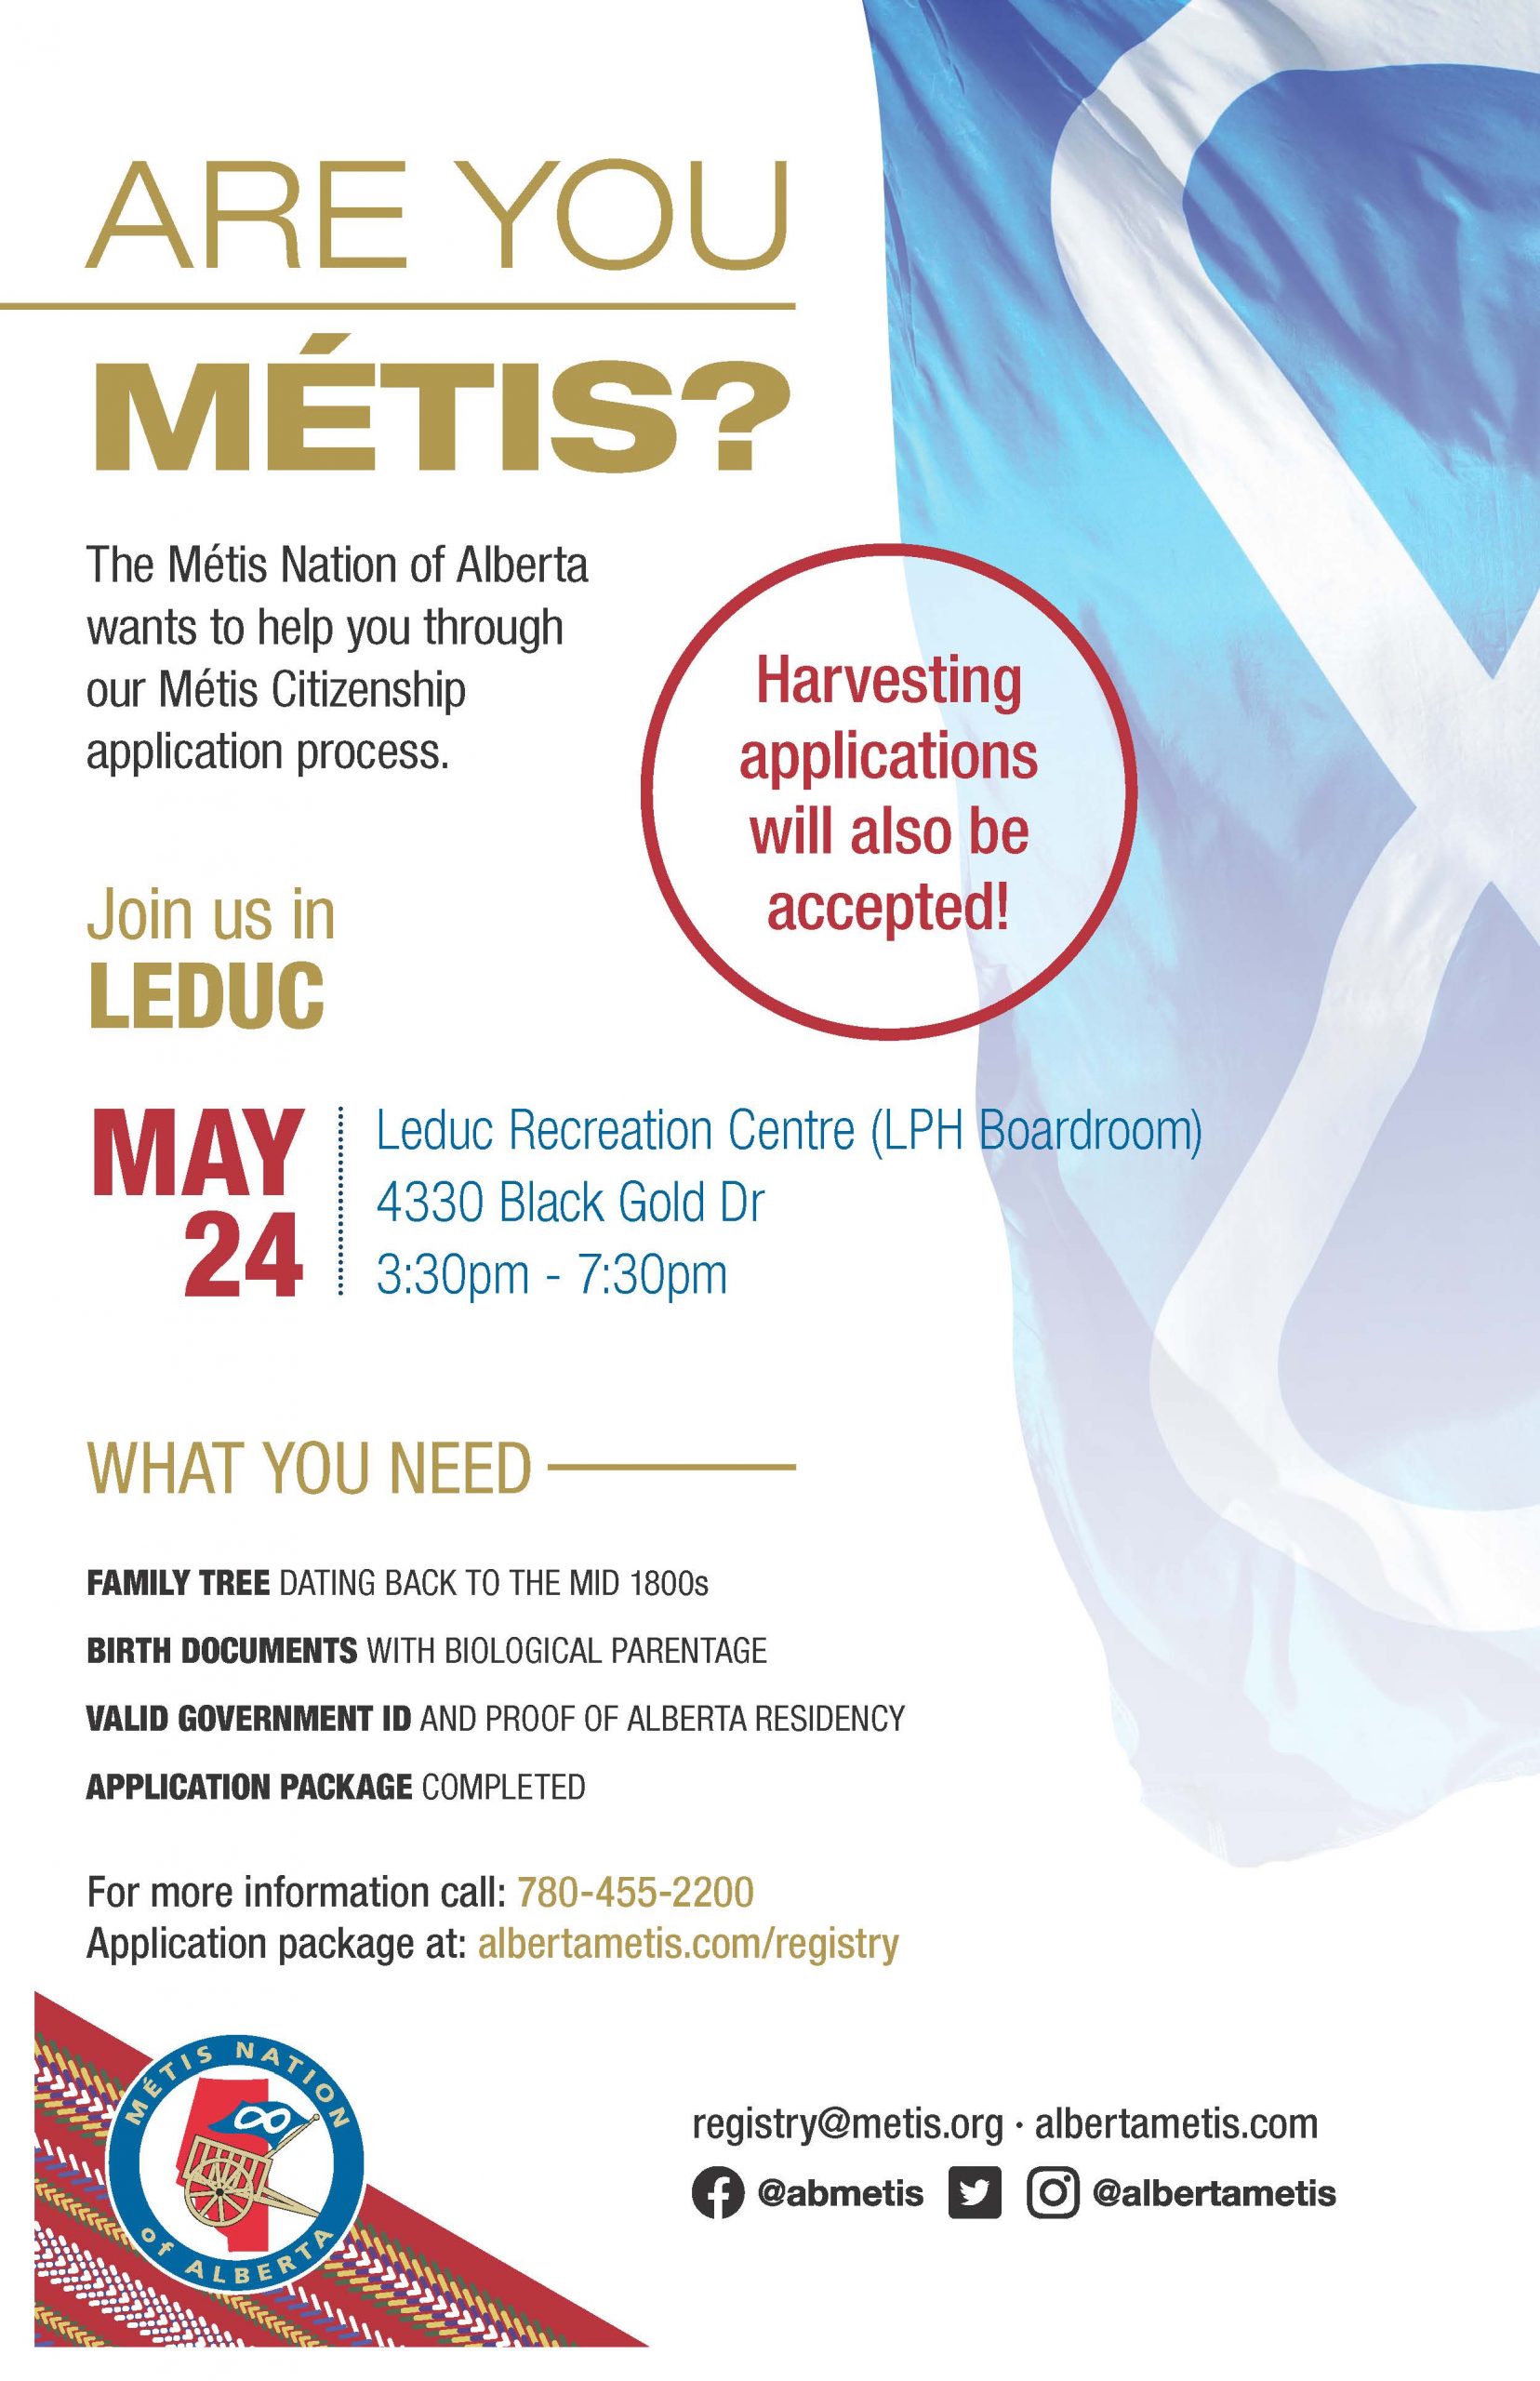 Are you Métis? The Metis Nation of Alberta wants to help you through our Metis Citizenship application process. Join us in Leduc May 24 at the Leduc Recreation Centre in the  LPH Boardroom located at 4330 Black Gold Drive from 3:30 p.m. to 7:30 p.m. What you need: A family tree dating back to the mid 1800s, Birth Documents with biological parentage, valid government id and proof of Alberta residency, and an application package completed. For more information call: 780 455 2200. Application package at albertametis.com/registry. Harvesting applications will also be accepted.